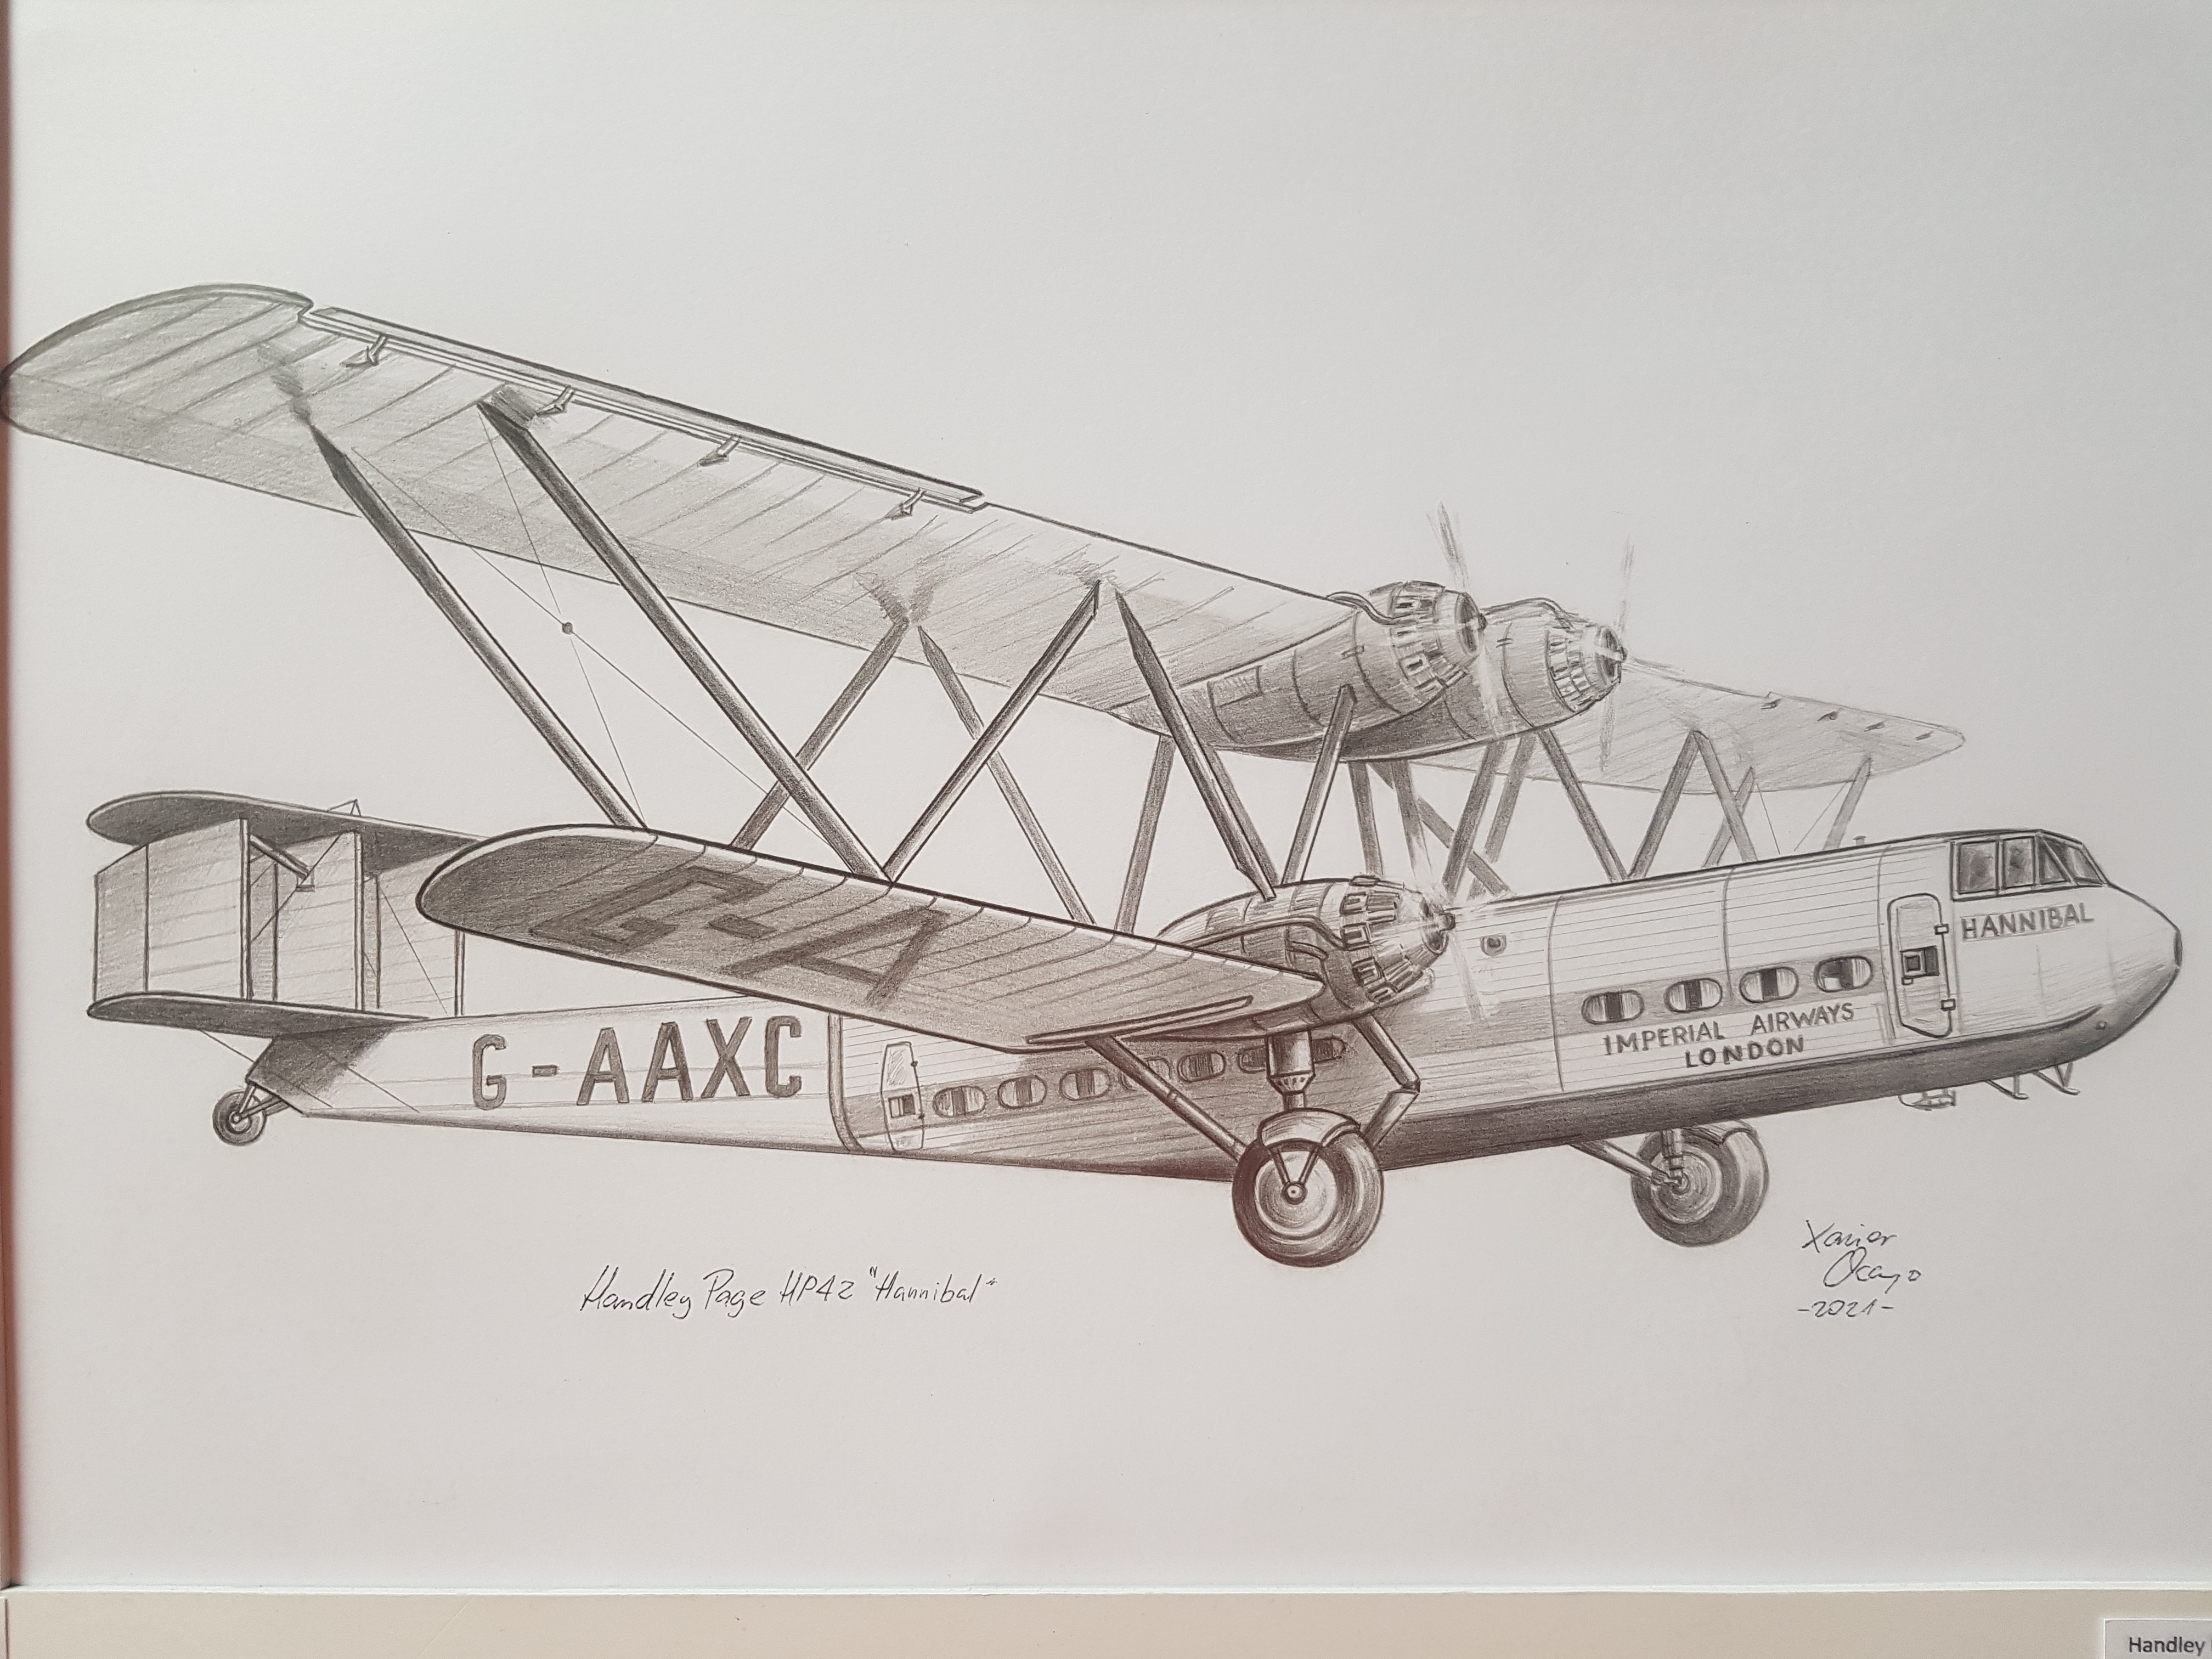 Handley Page H.P.42 Wallpapers